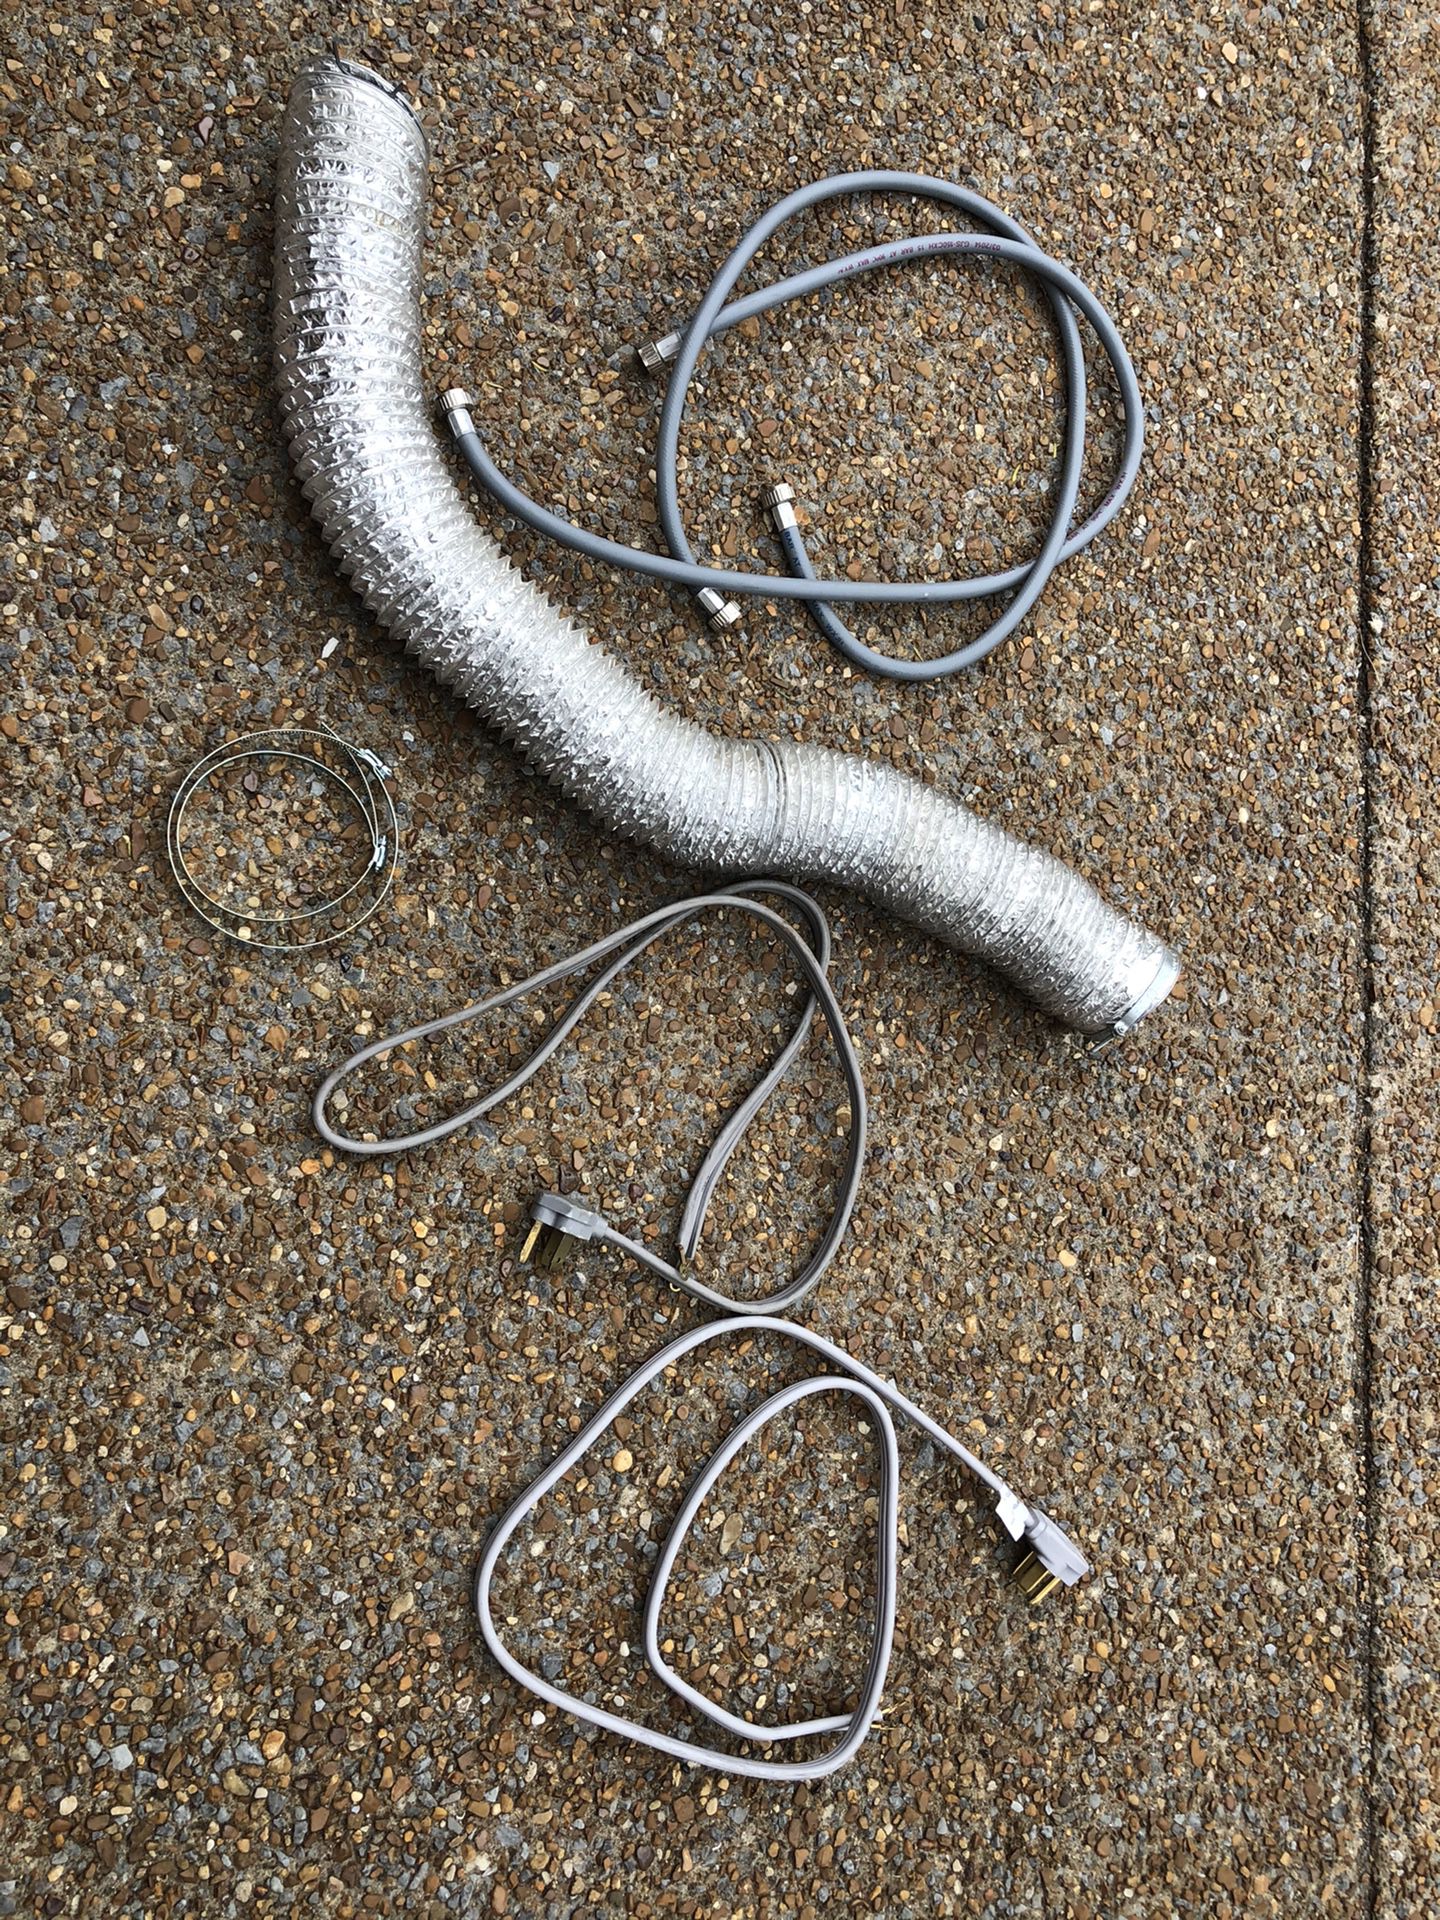 Dryer plugs, exhaust, washer hoses